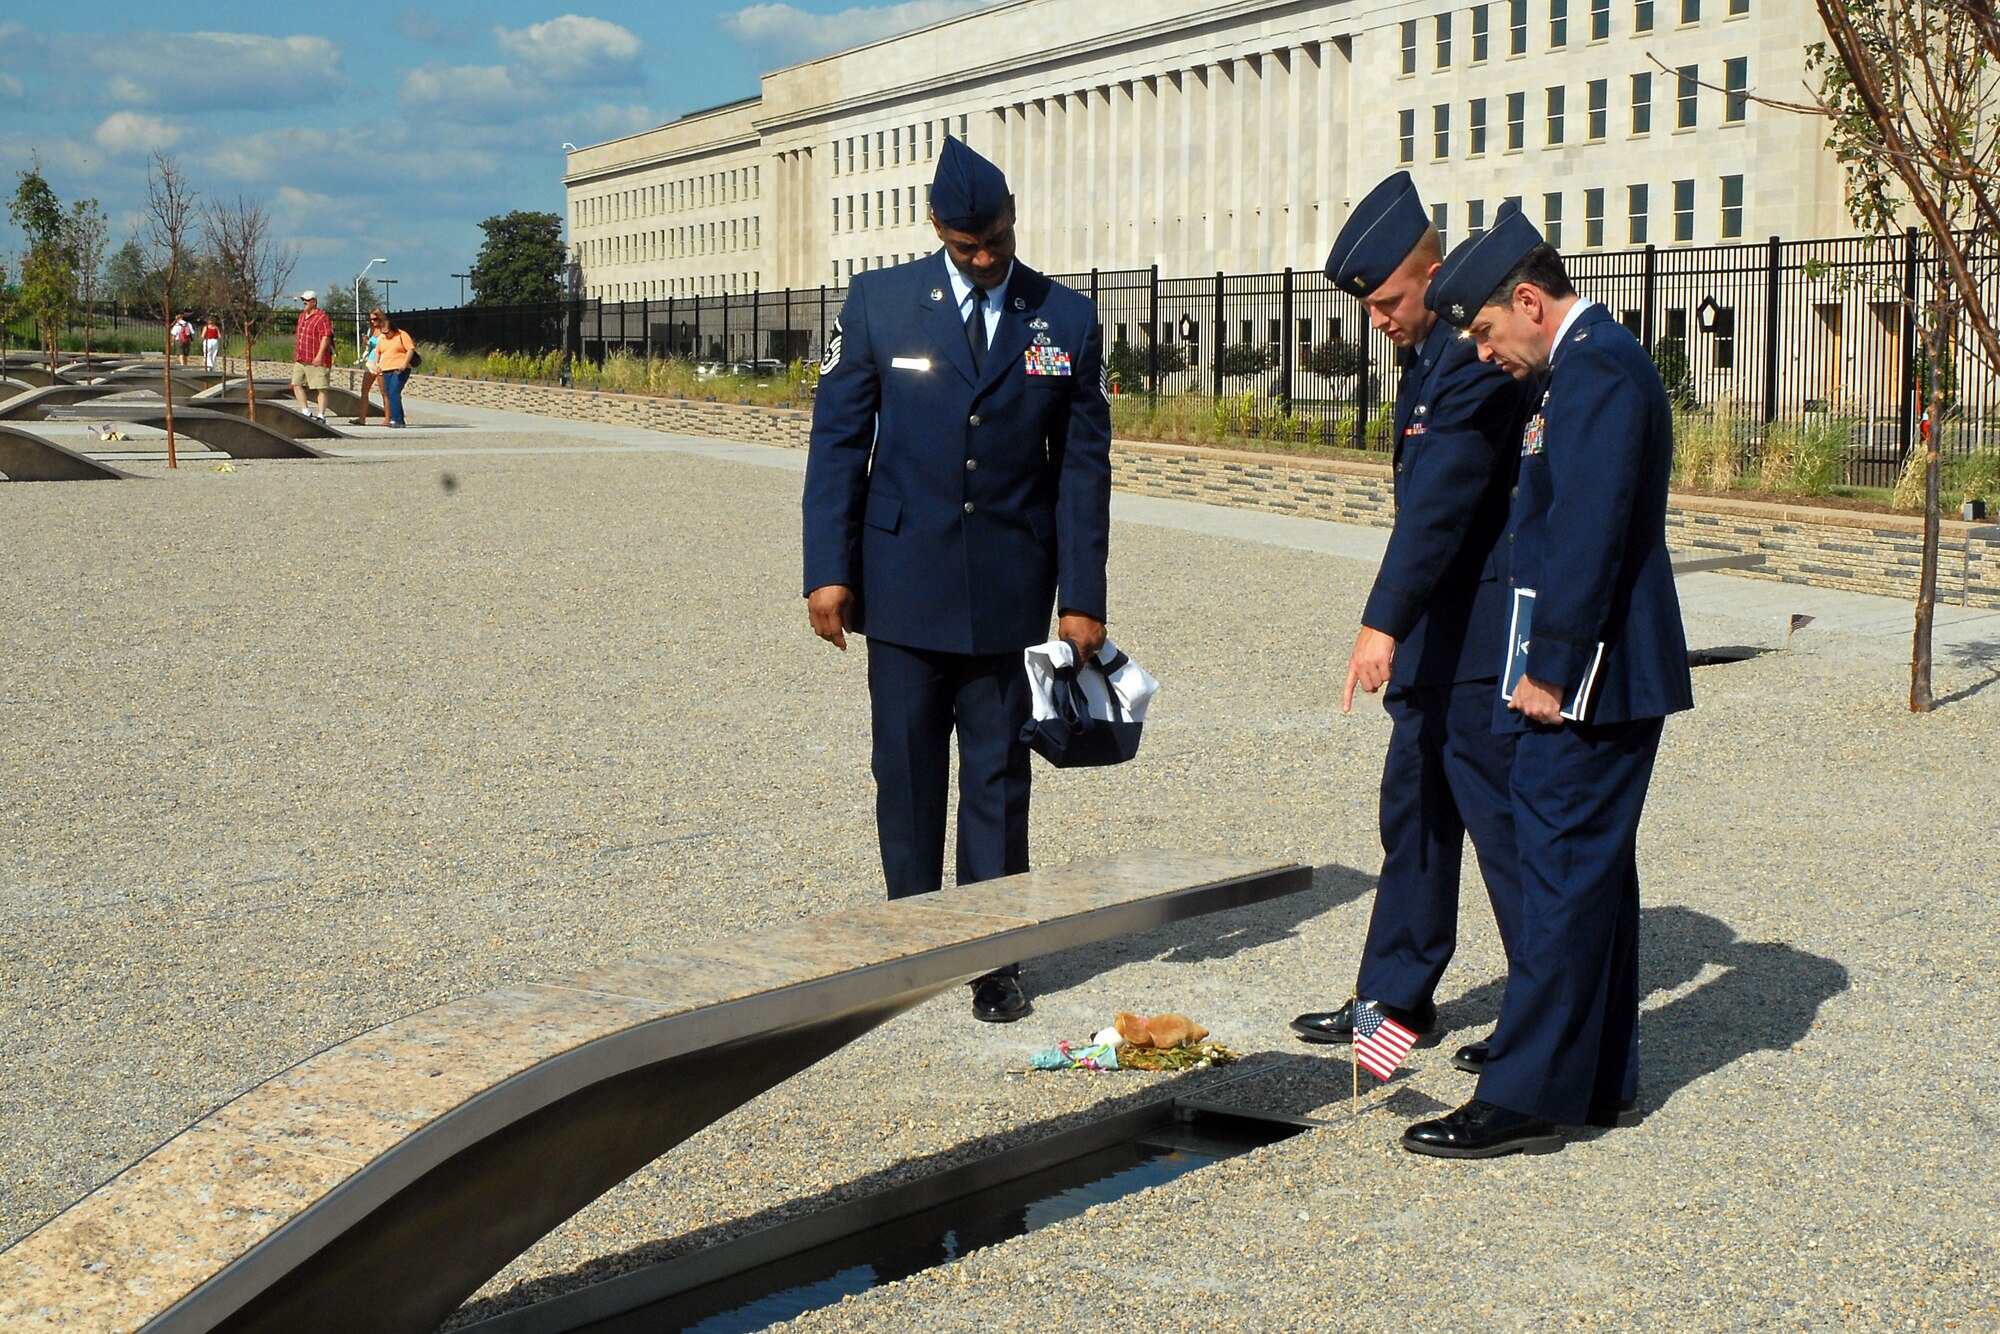 Master Sgt. Charles Washington, 2nd Lt. Justin Ellsworth and Lt. Col. Nelson Novo look at one of 184 inscribed memorial units that are part of the Pentagon Memorial in Washington, D.C., Sept. 15. Members of the 437th Airlift Wing went to D.C. to accept the Verne Orr Award and also received a tour of the Pentagon. Sergeant Washington is with the 437 AW Legal Office, Lieutenant Ellsworth is with the 437th Communications Squadron and Colonel Novo is the 437 AW director of staff. (U.S. Air Force photo/Airman 1st Class Melissa White)